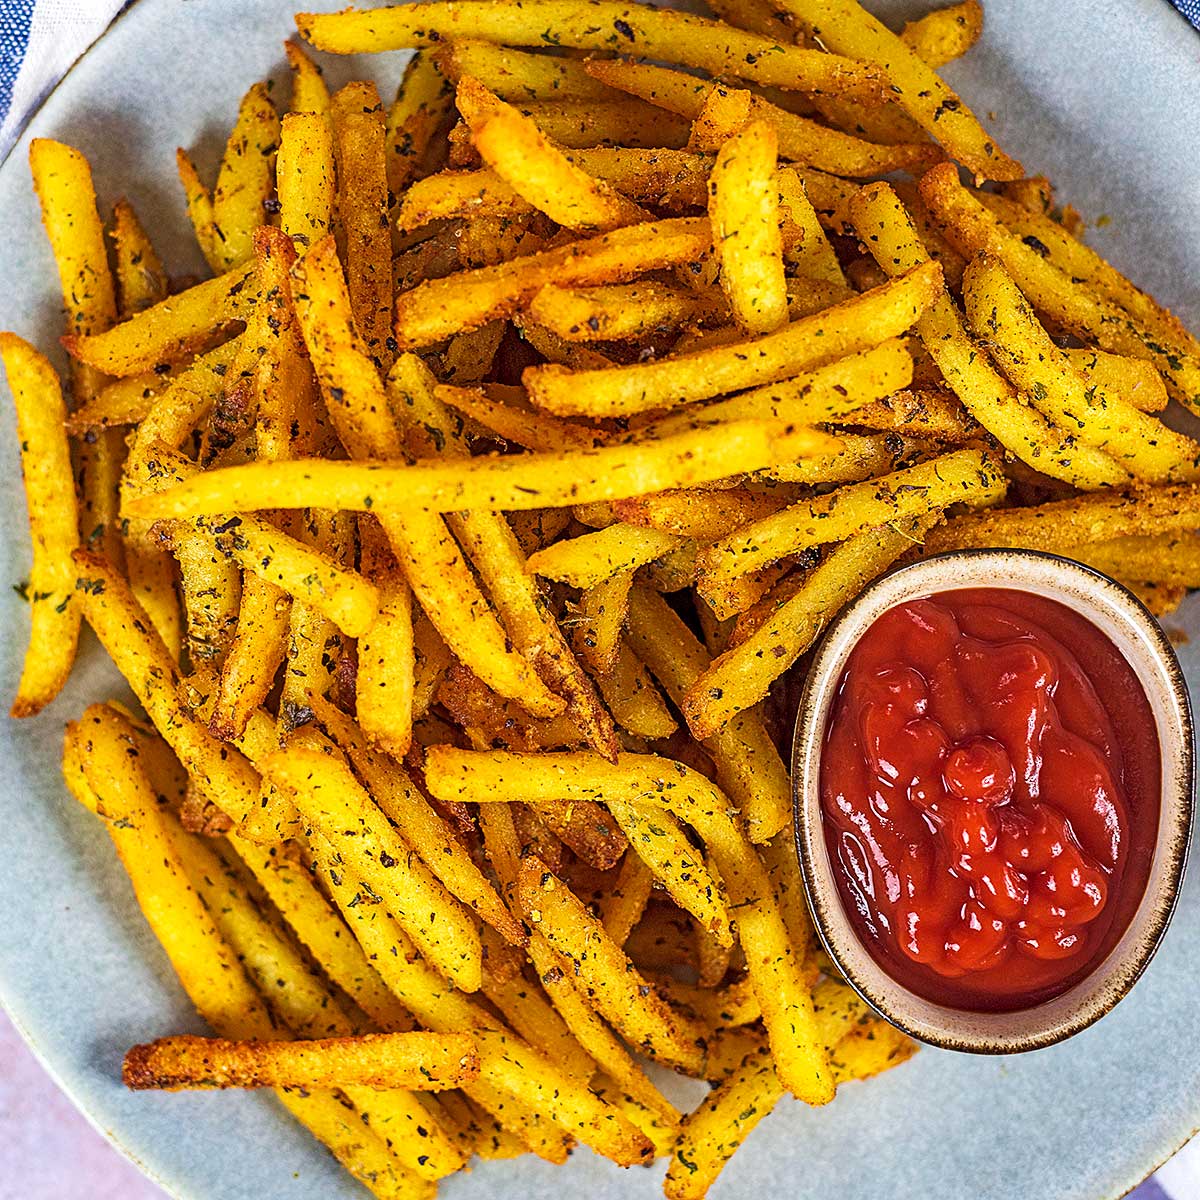 https://hungryhealthyhappy.com/wp-content/uploads/2020/10/French-Fry-Seasoning-featued-b.jpg